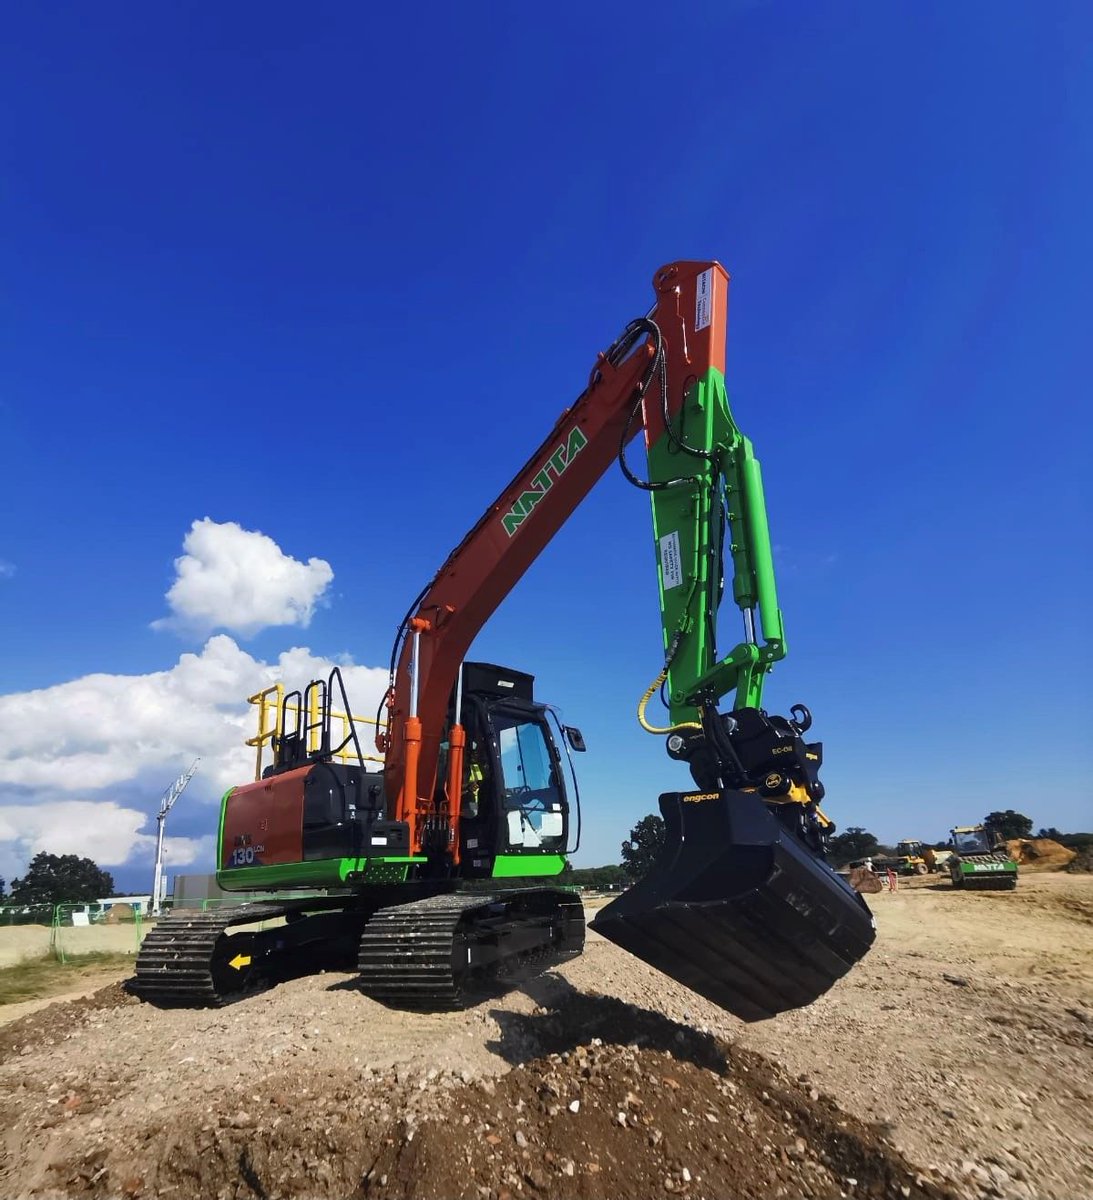 We've been waiting a while for this one! We're delighted to put to work our new @hitachi_uk ZX130-6 c/w @TrimbleCorpNews Earthworks and an @engcon_uk Tiltrotator. Great machine to put to work in this great weather.

#quality #innovation #collaboration